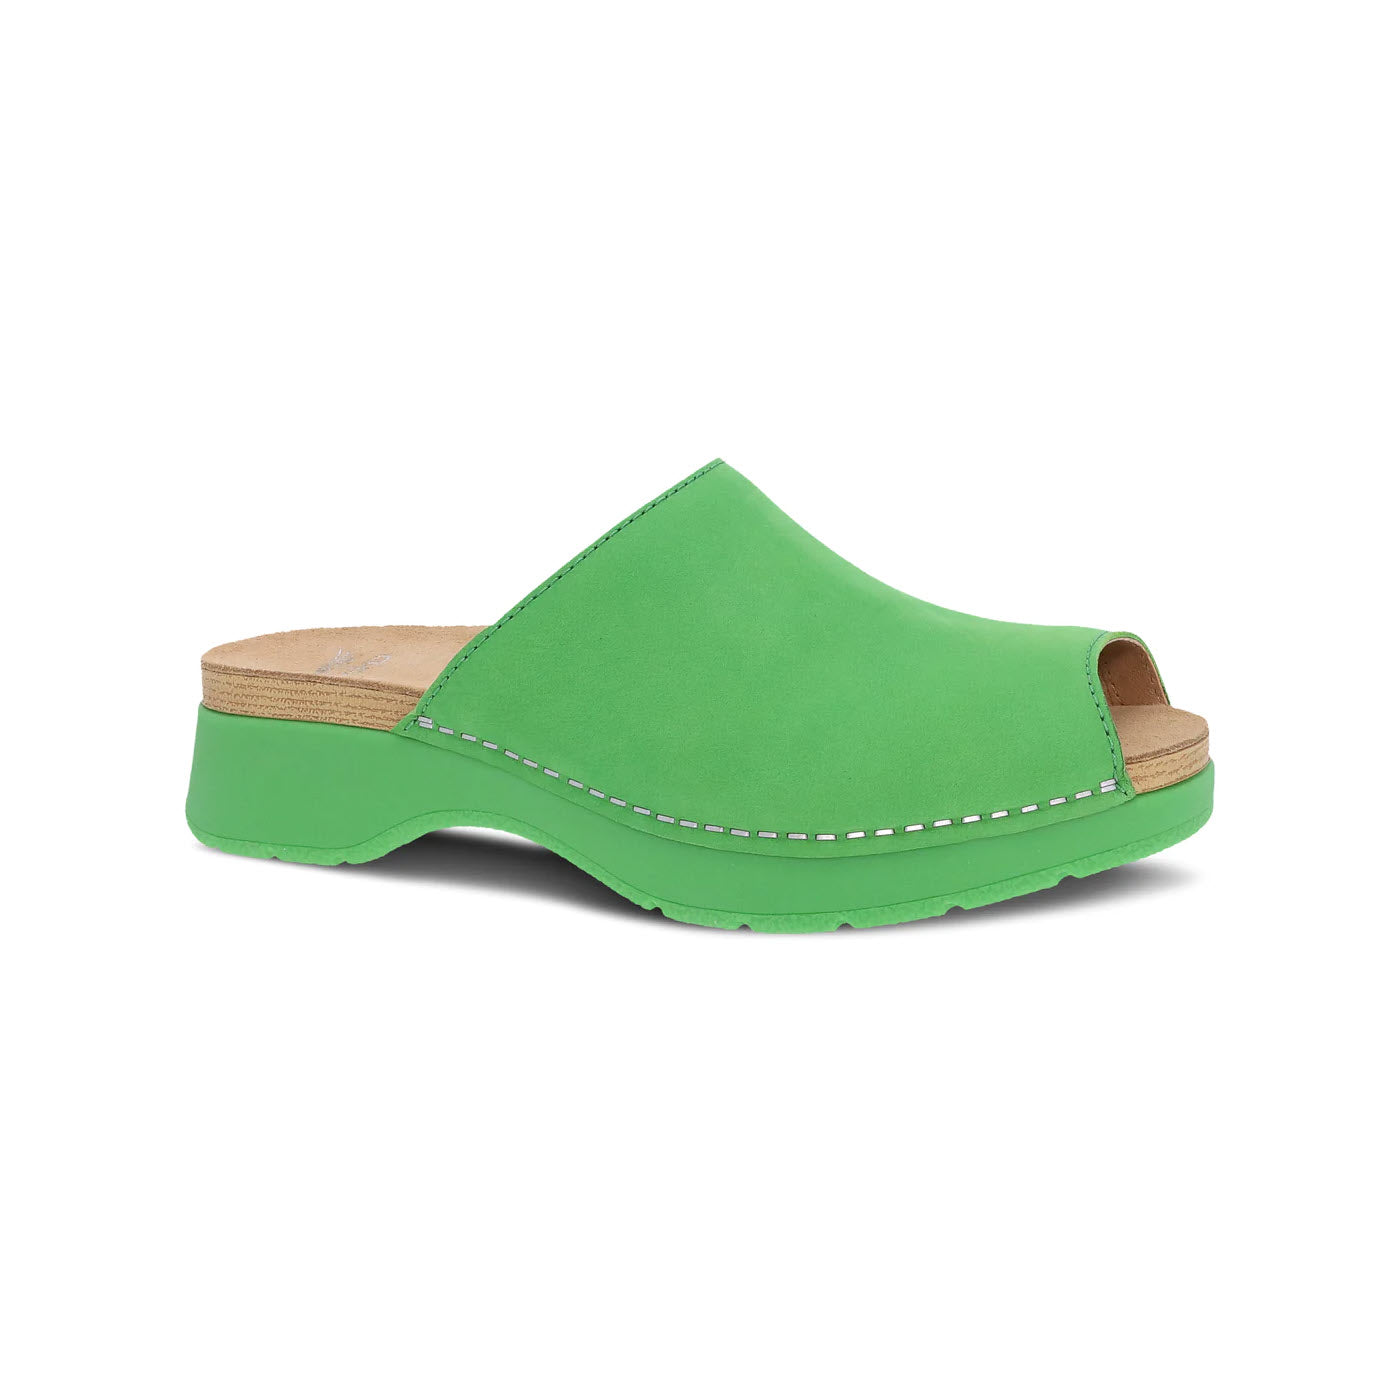 A vibrant green, single clog shoe featuring a peep toe, an open back, and noticeable stitching details on a white background. 
Product Name: Dansko Ravyn Lime - Womens
Brand Name: Dansko